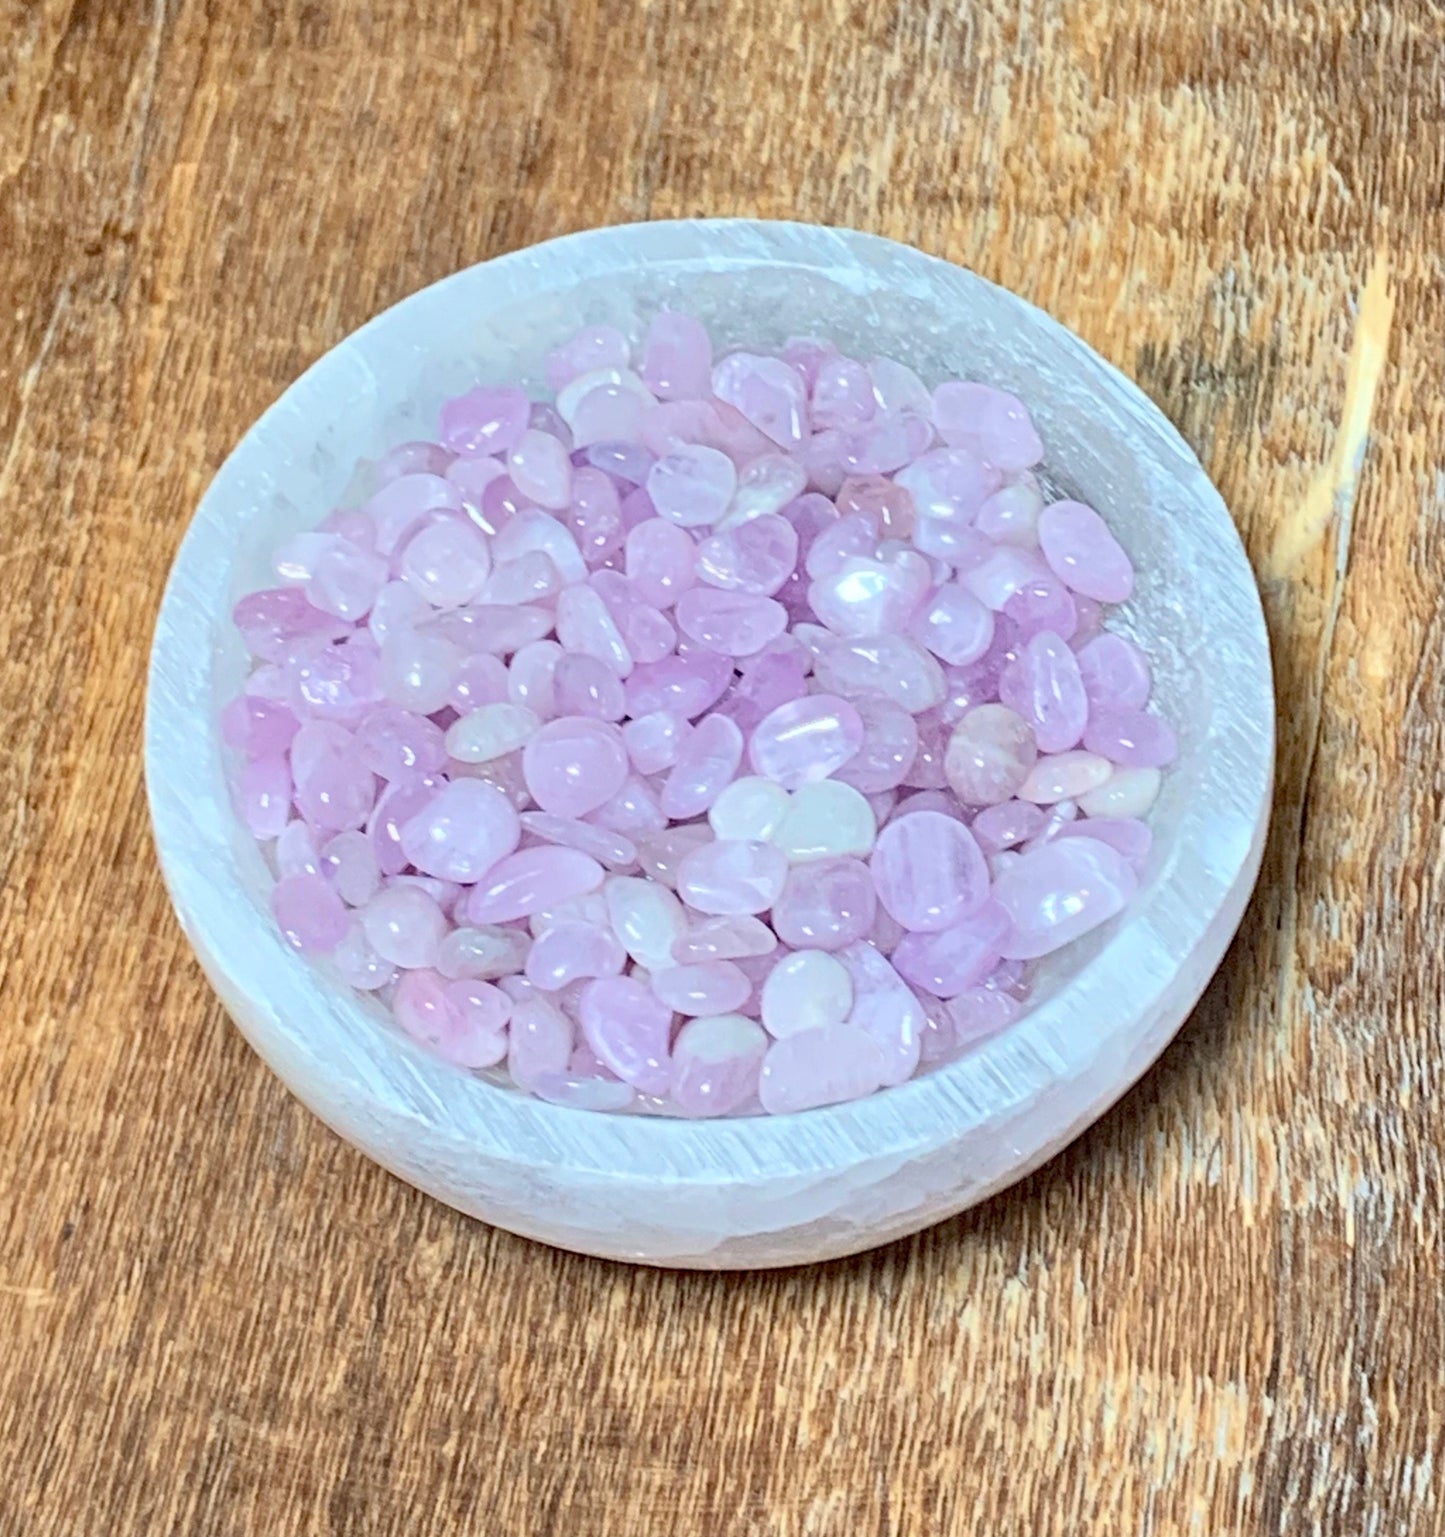 Kunzite Tumbled Crystal Chips / High Quality Natural Gemstone Chips / Bulk Wholesale Crystal Chips / 5-10mm / Crystal Confetti Chips